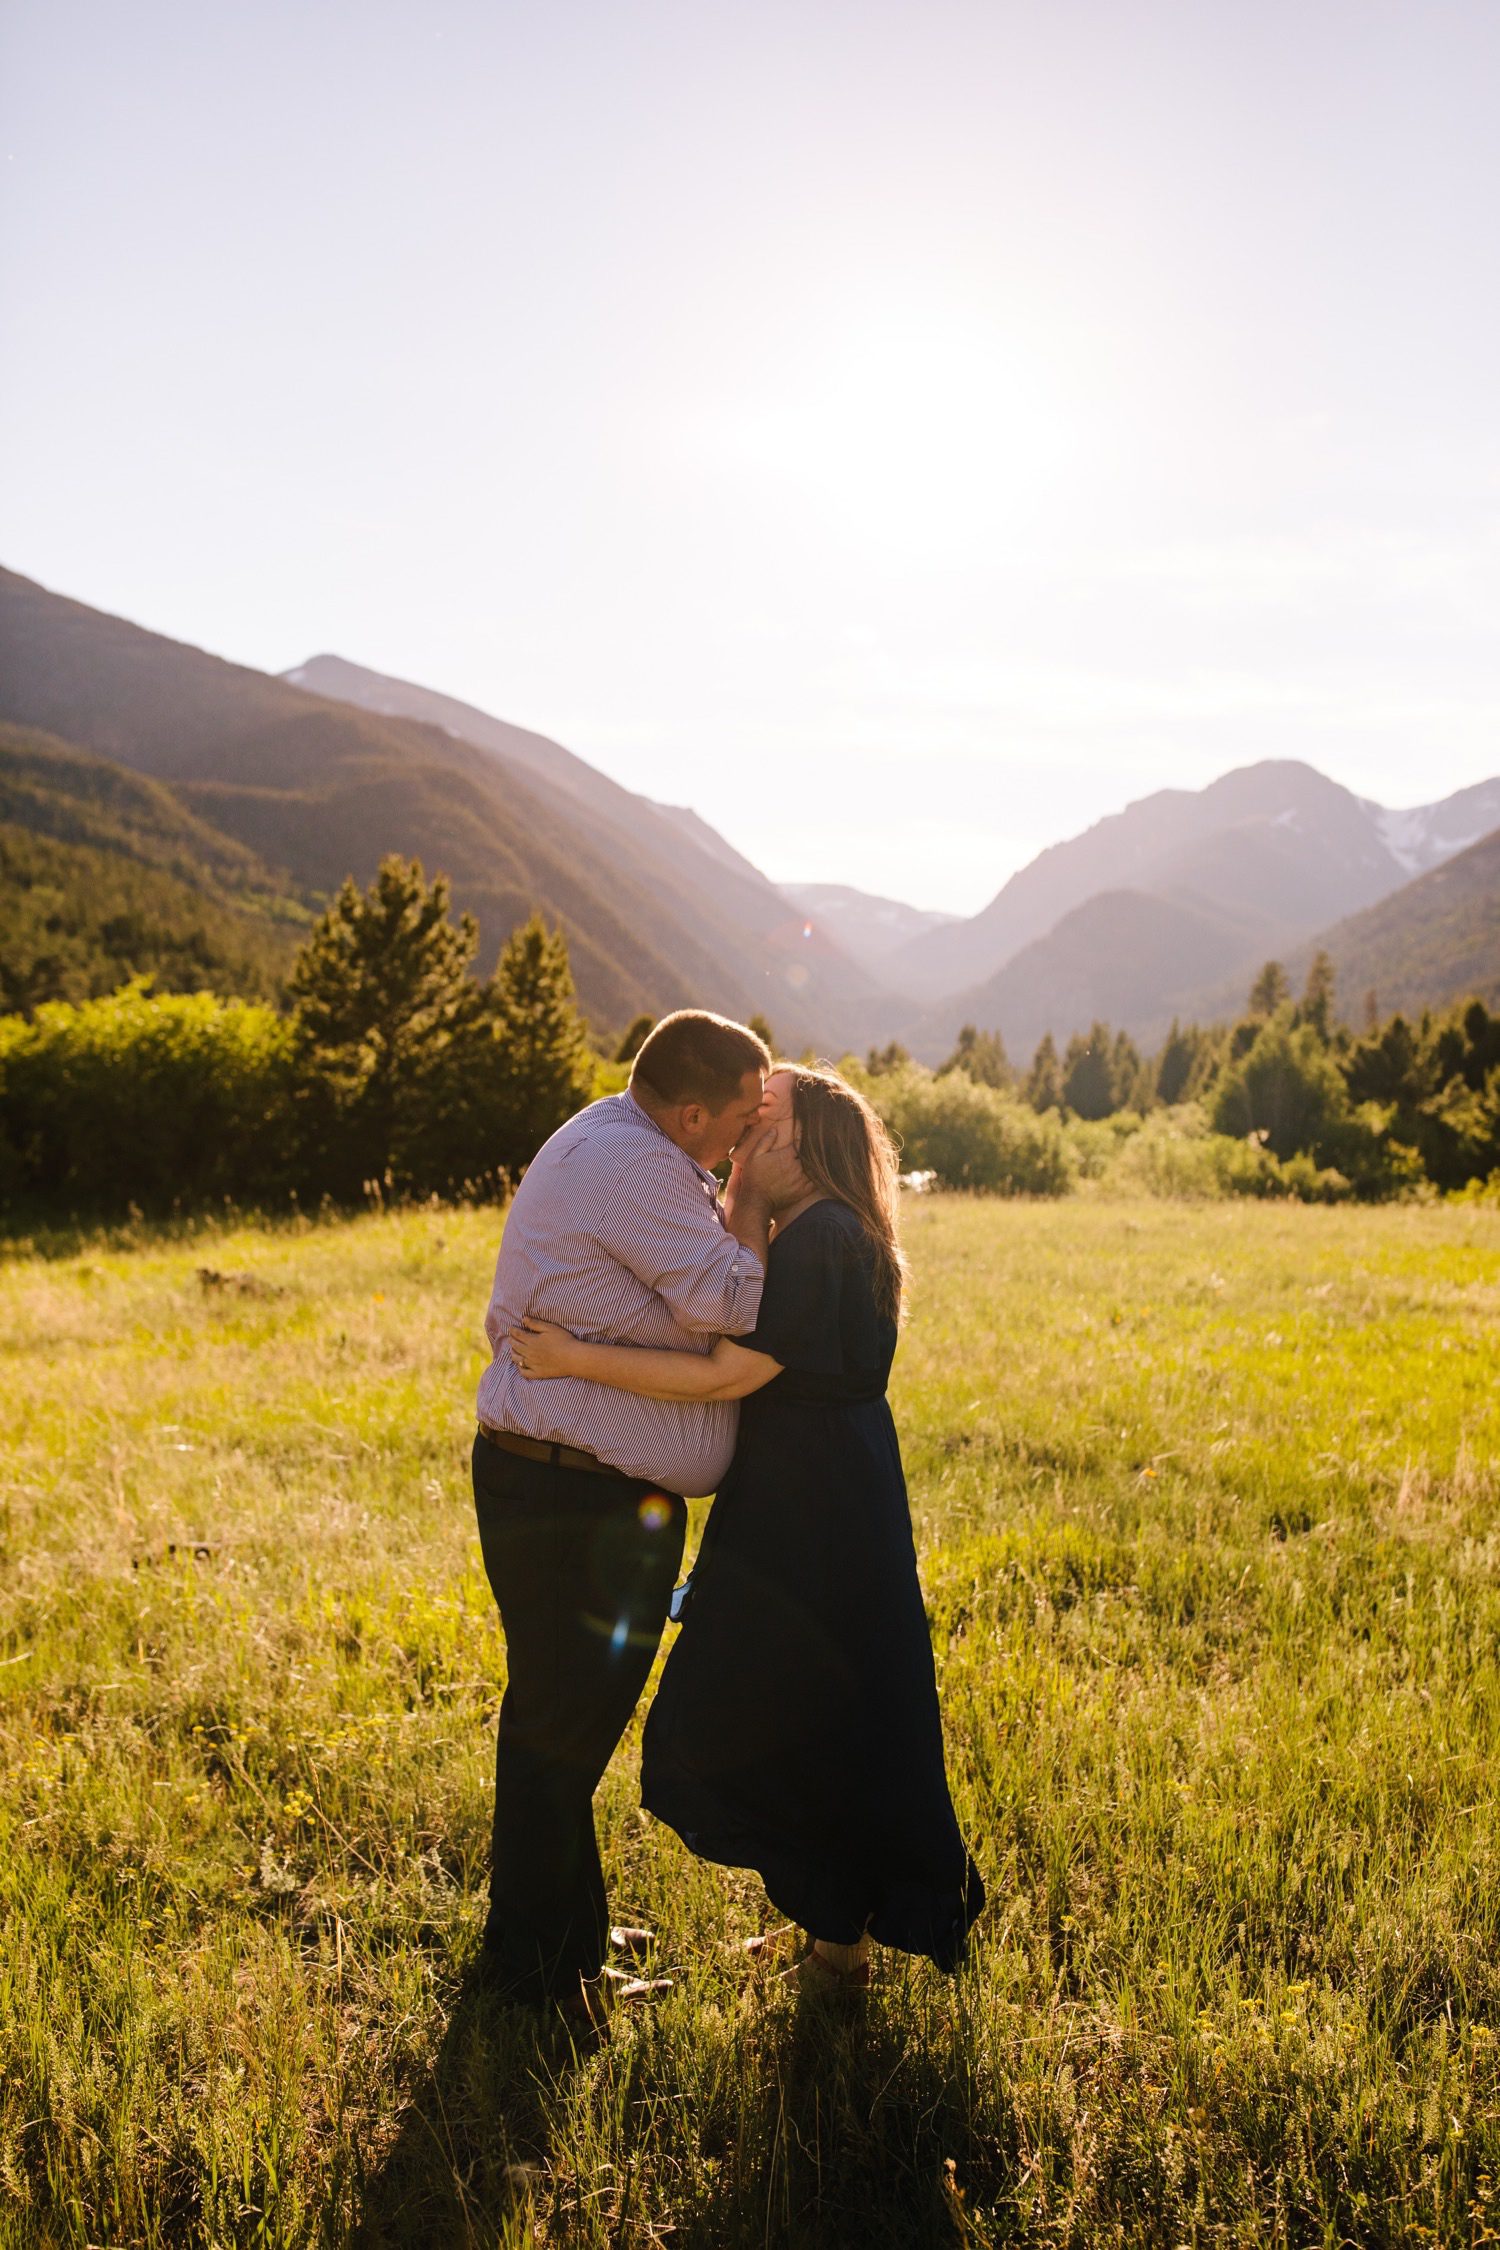 Engagement photos in Rocky Mountain National Park, Fall River Road Rocky Mountain National Park, Sheep Lakes Rocky Mountain National Park, Rocky Mountain National Park Engagement Session, Estes Park Engagement Photos, Rocky Mountain National Park Engagement Session, Estes Park Photographer, Colorado Engagement Photographer, Estes Park Wedding Photographer, Colorado Engagement Photos, Mountain Engagement Photos, Engagement session posing, What to wear for engagement photos